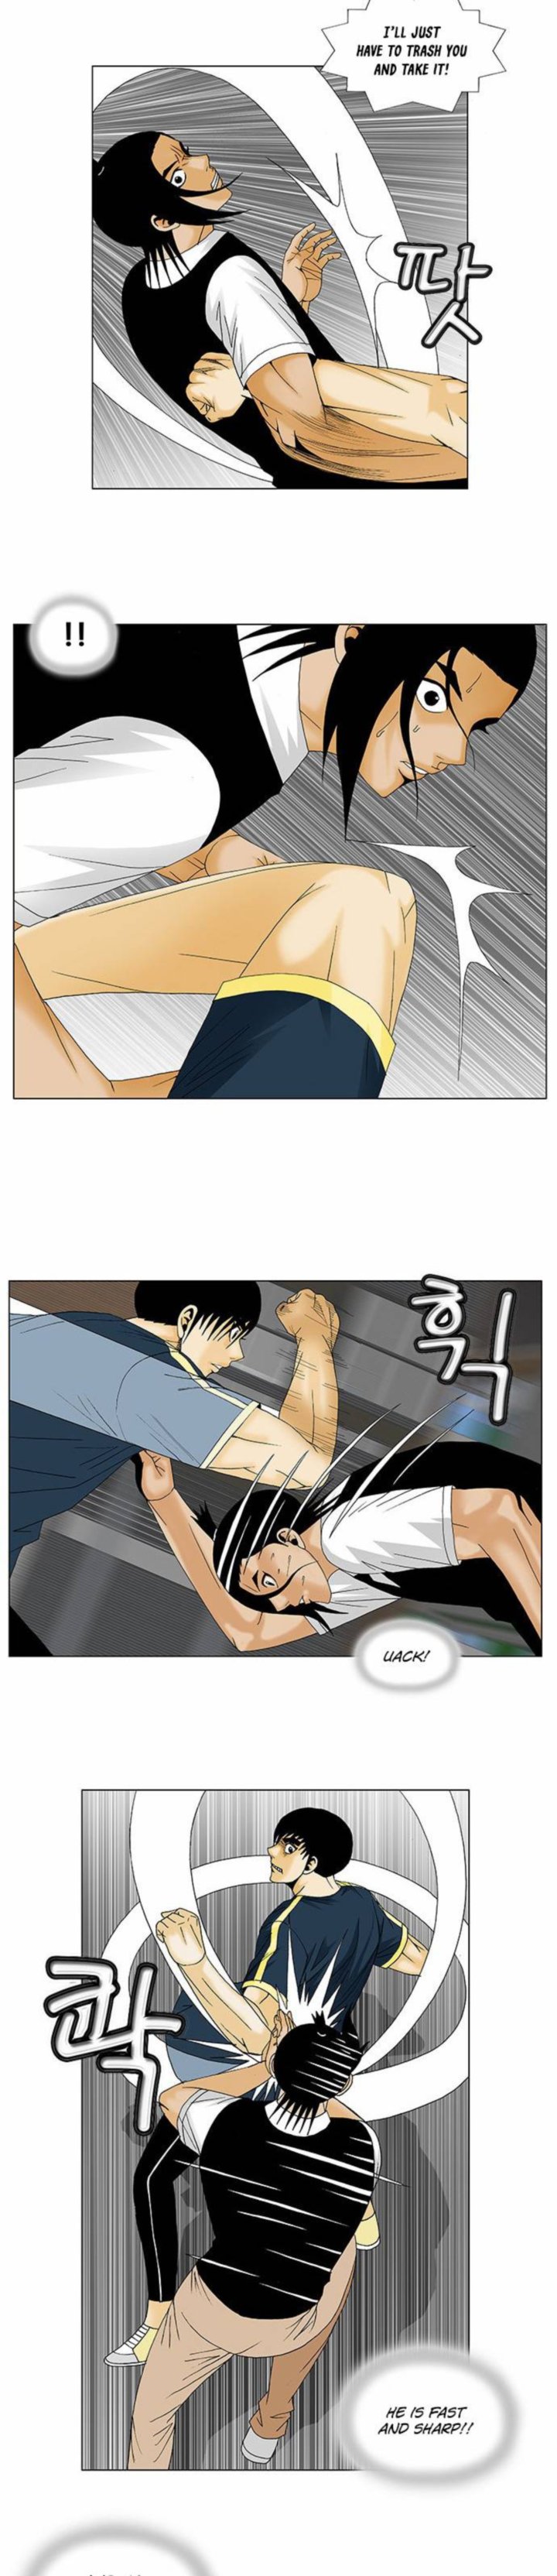 Ultimate Legend Kang Hae Hyo Chapter 132 Page 5